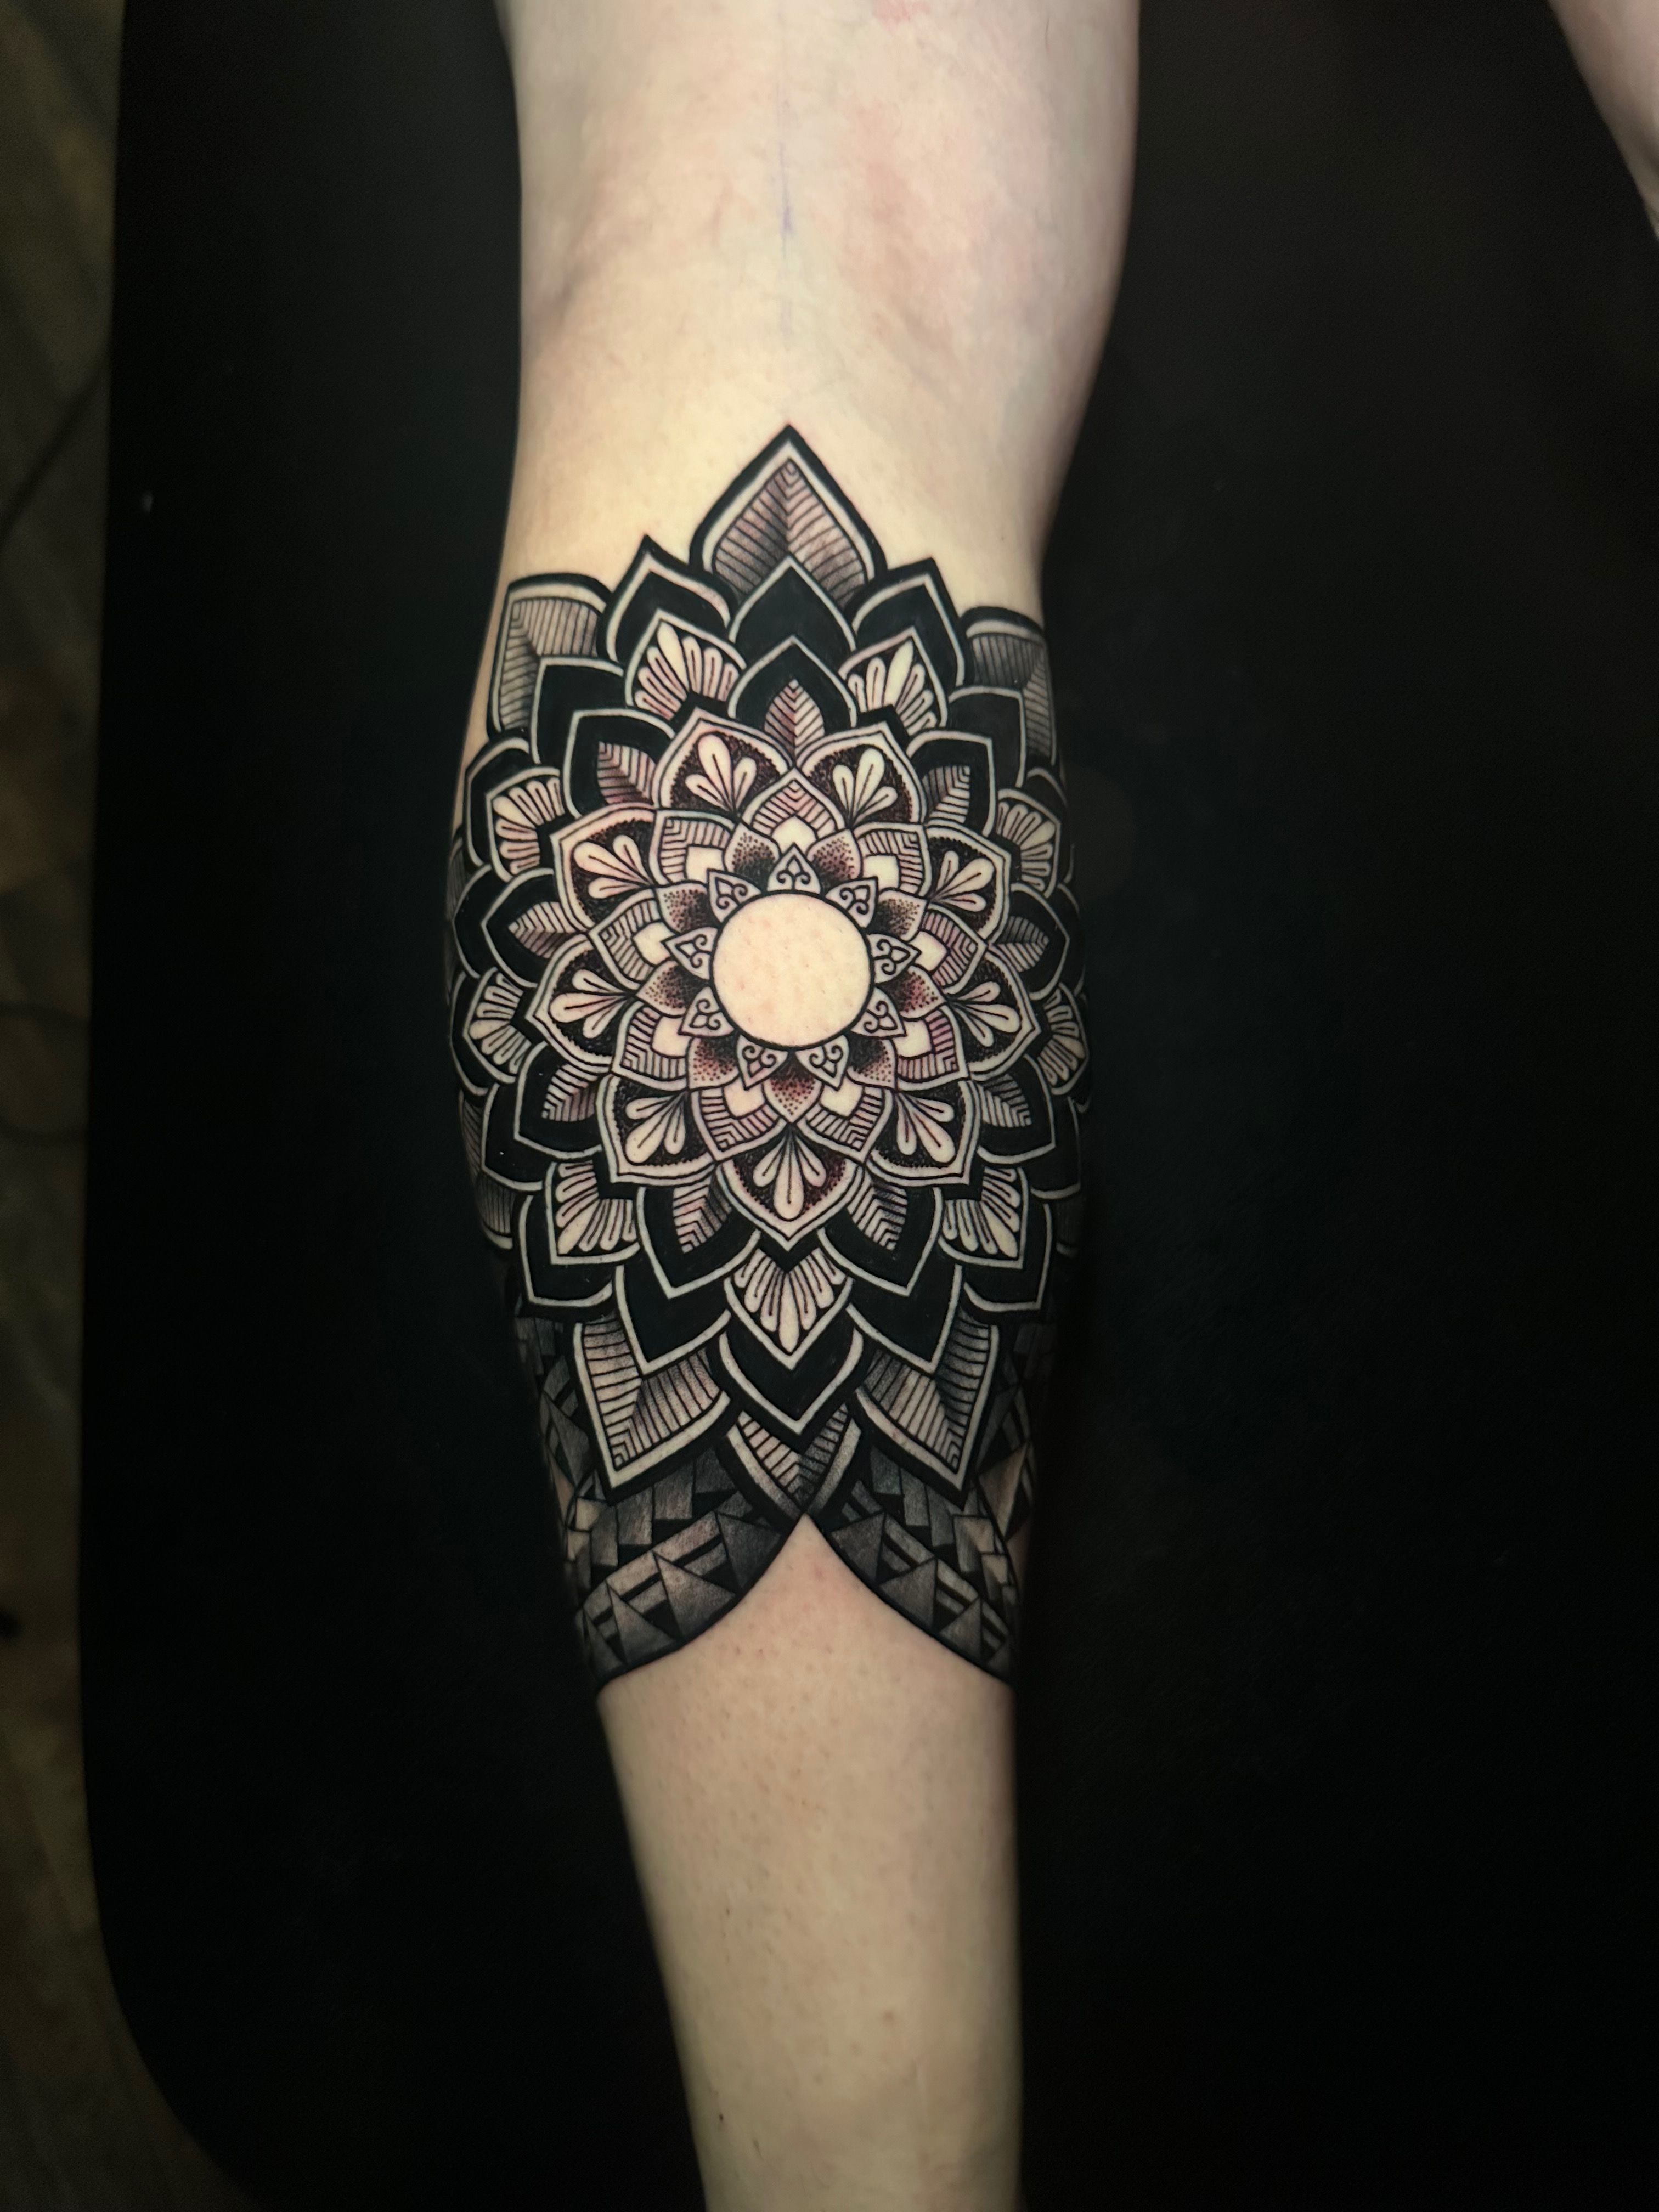 50+ Best Elbow Tattoo Designs Ideas To Match Your Style - Saved Tattoo